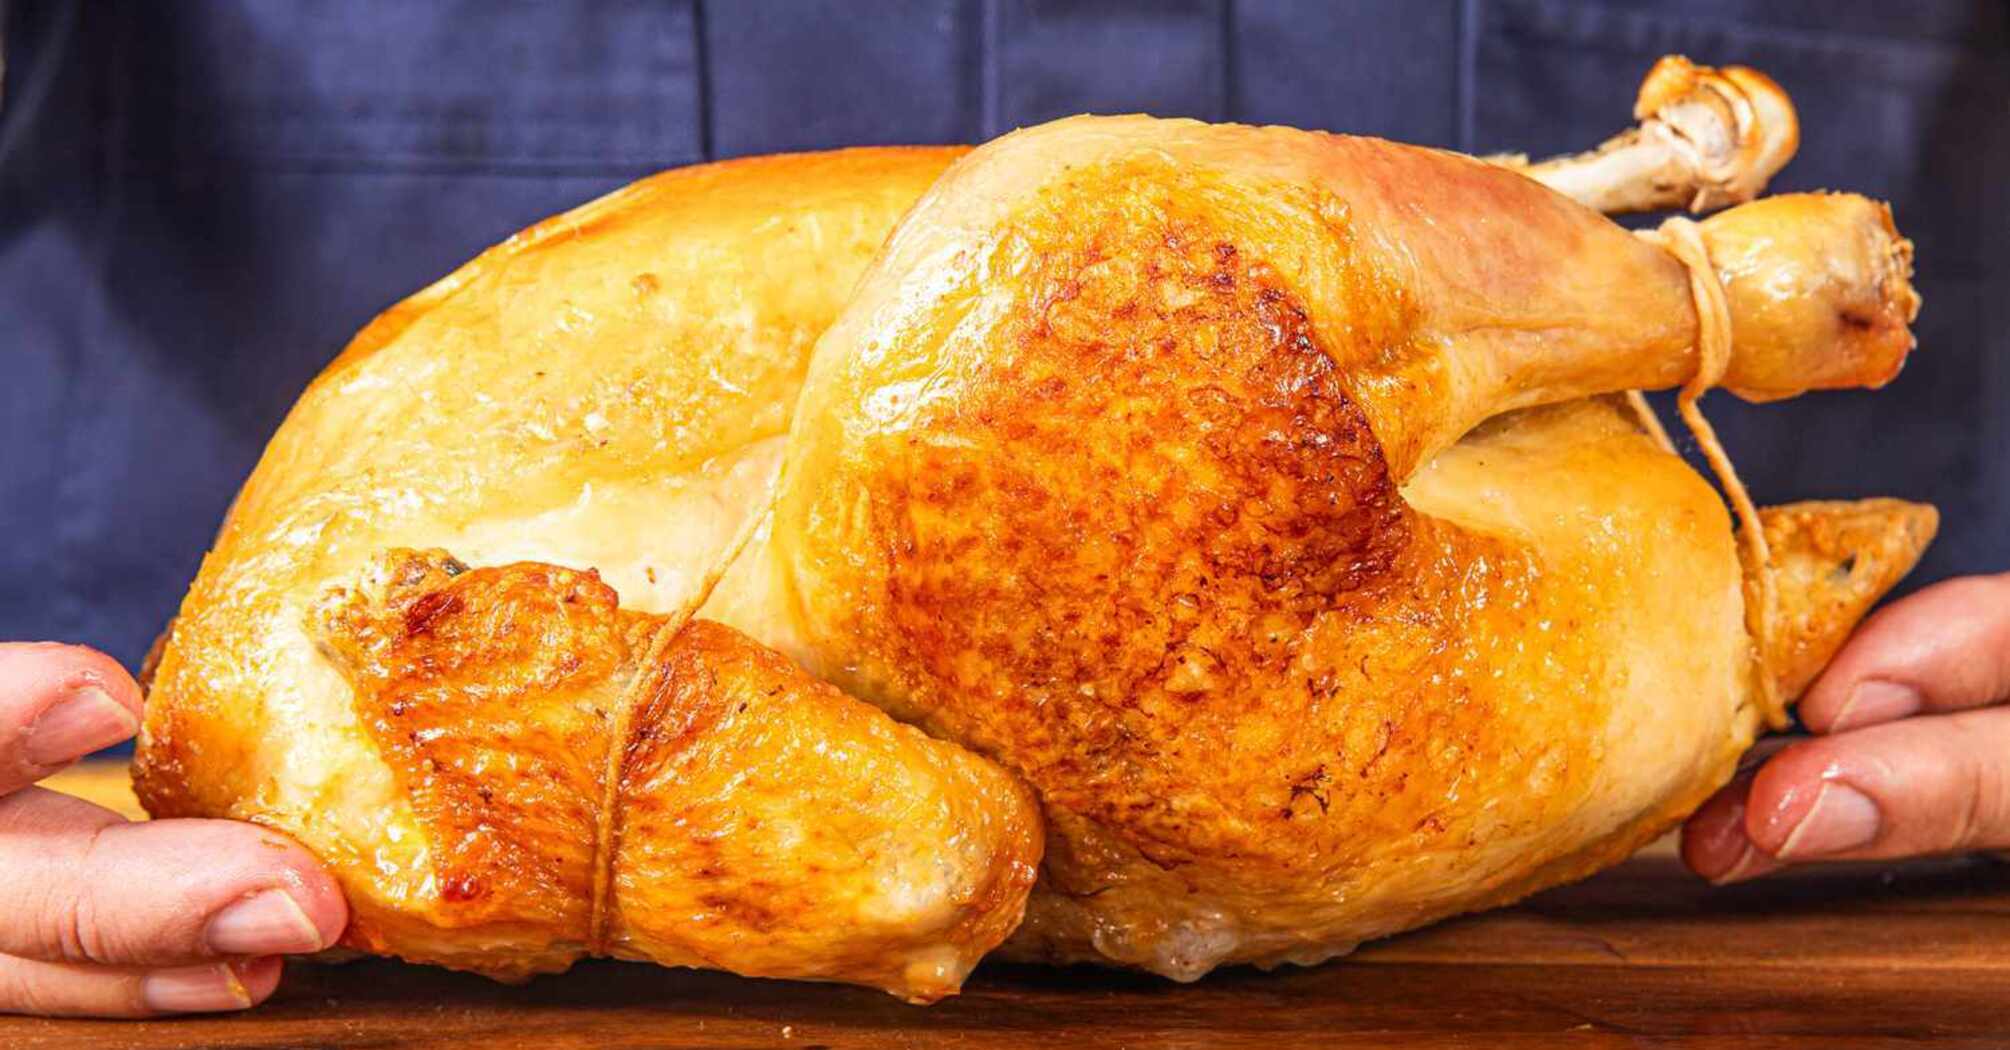 How to cook perfectly roasted chicken